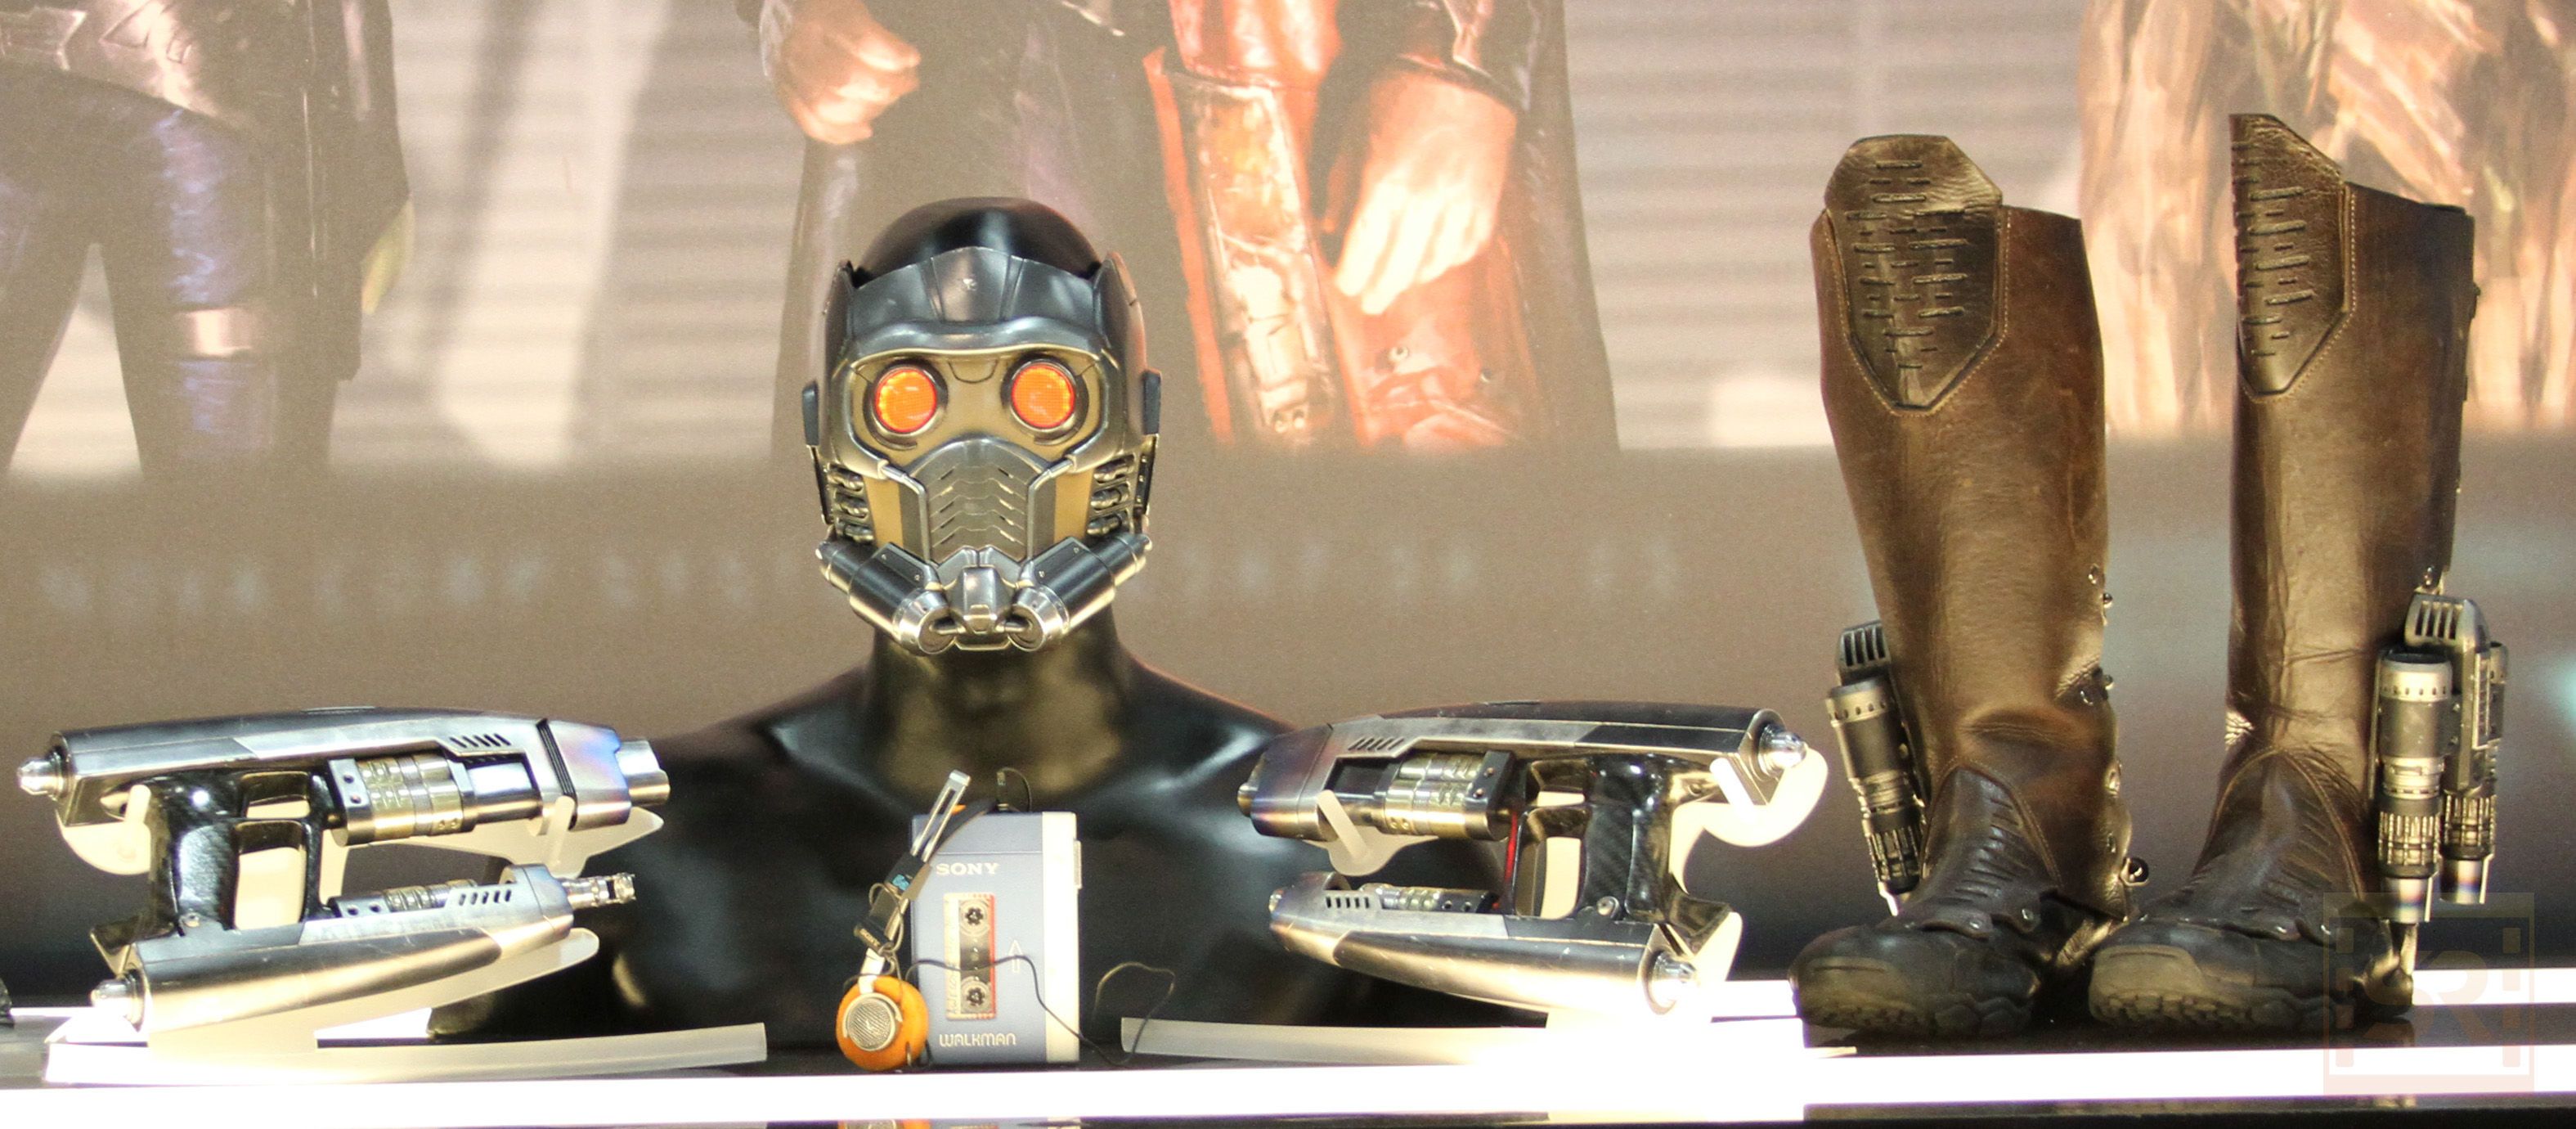 Official Guardians of the Galaxy Star-Lord Movie Props & Costume